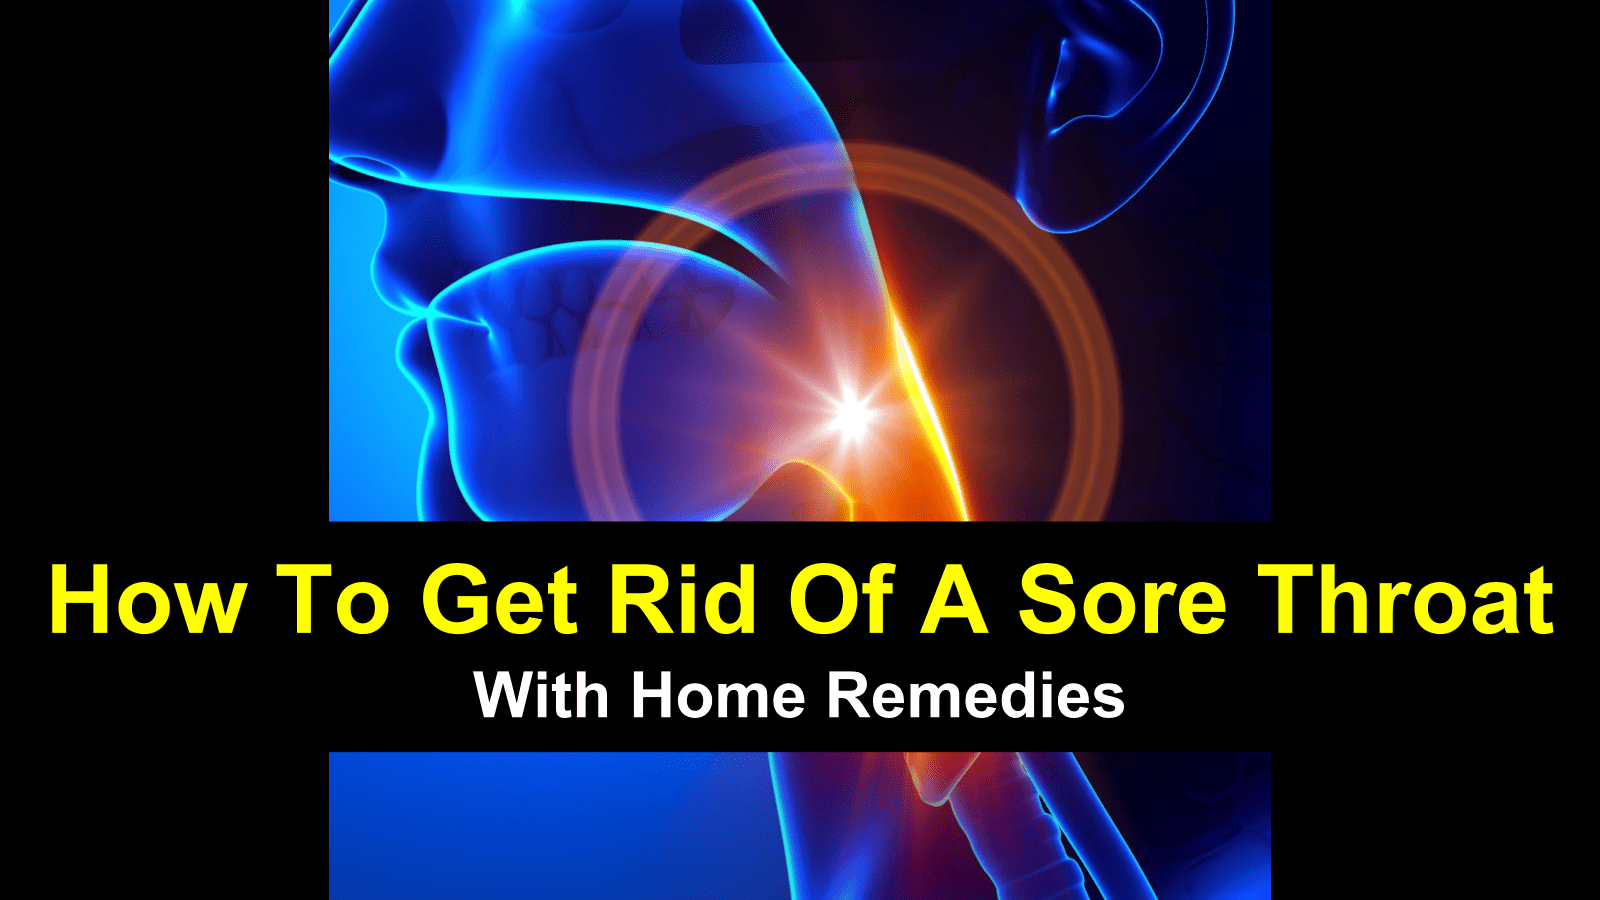 how to get rid of a sore throat using home remedies